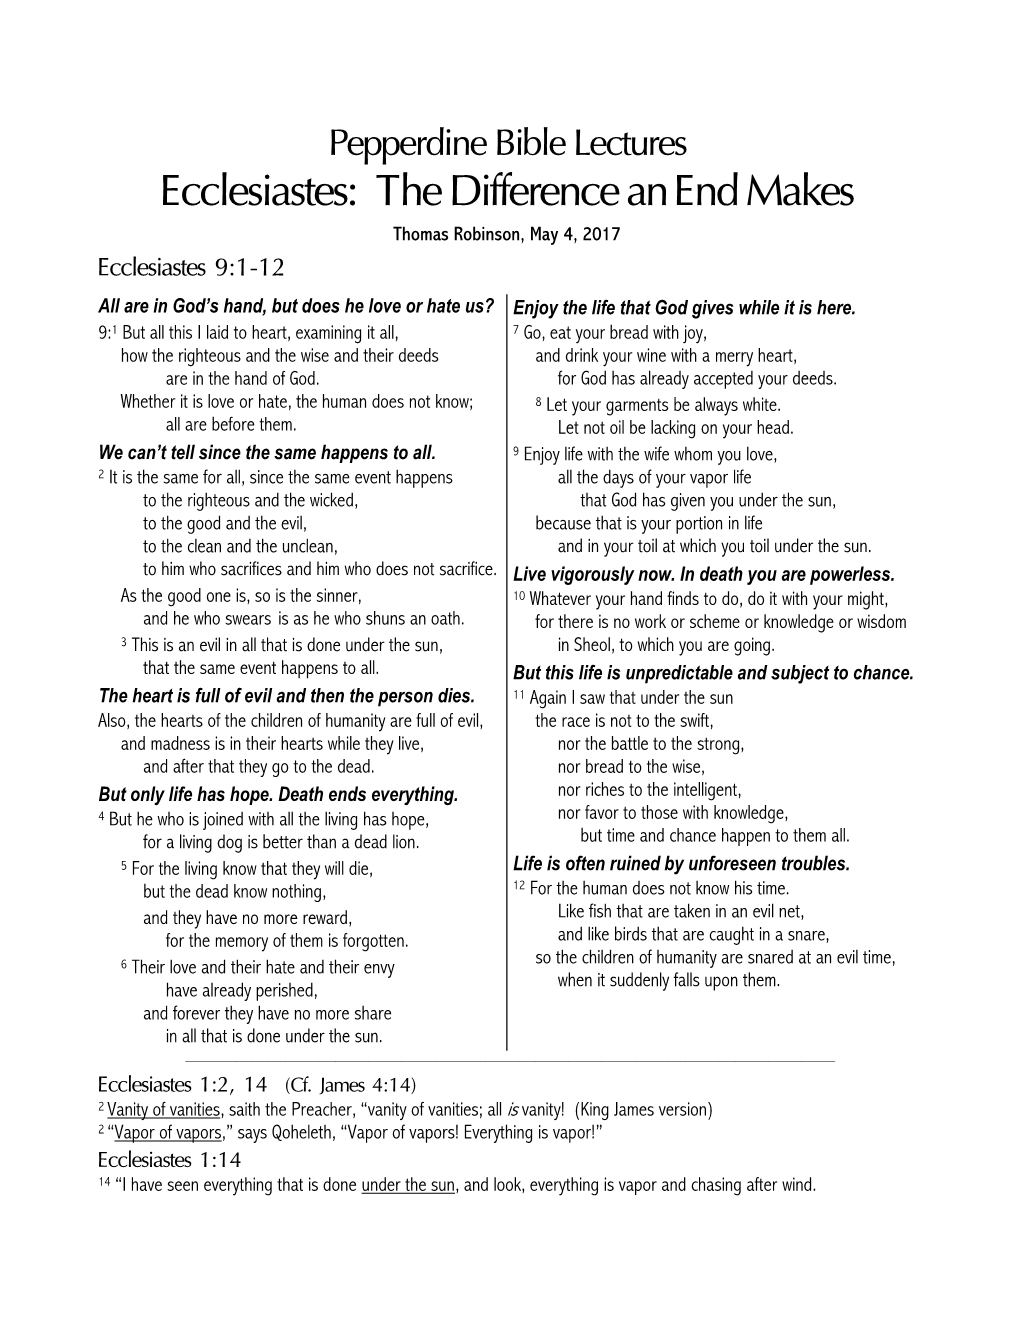 Ecclesiastes: the Difference an End Makes